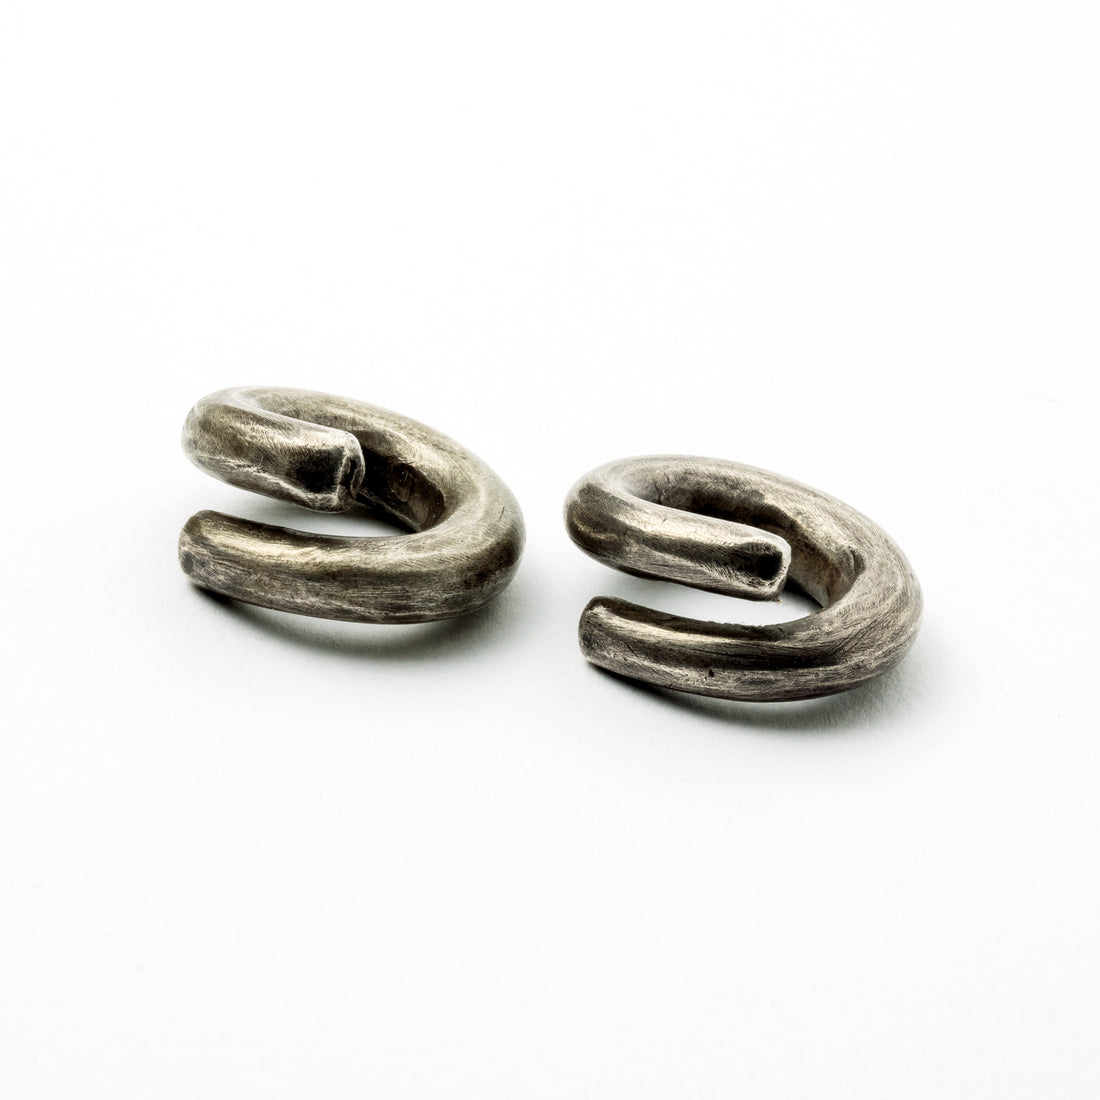 Nomad Silver Ear Weights